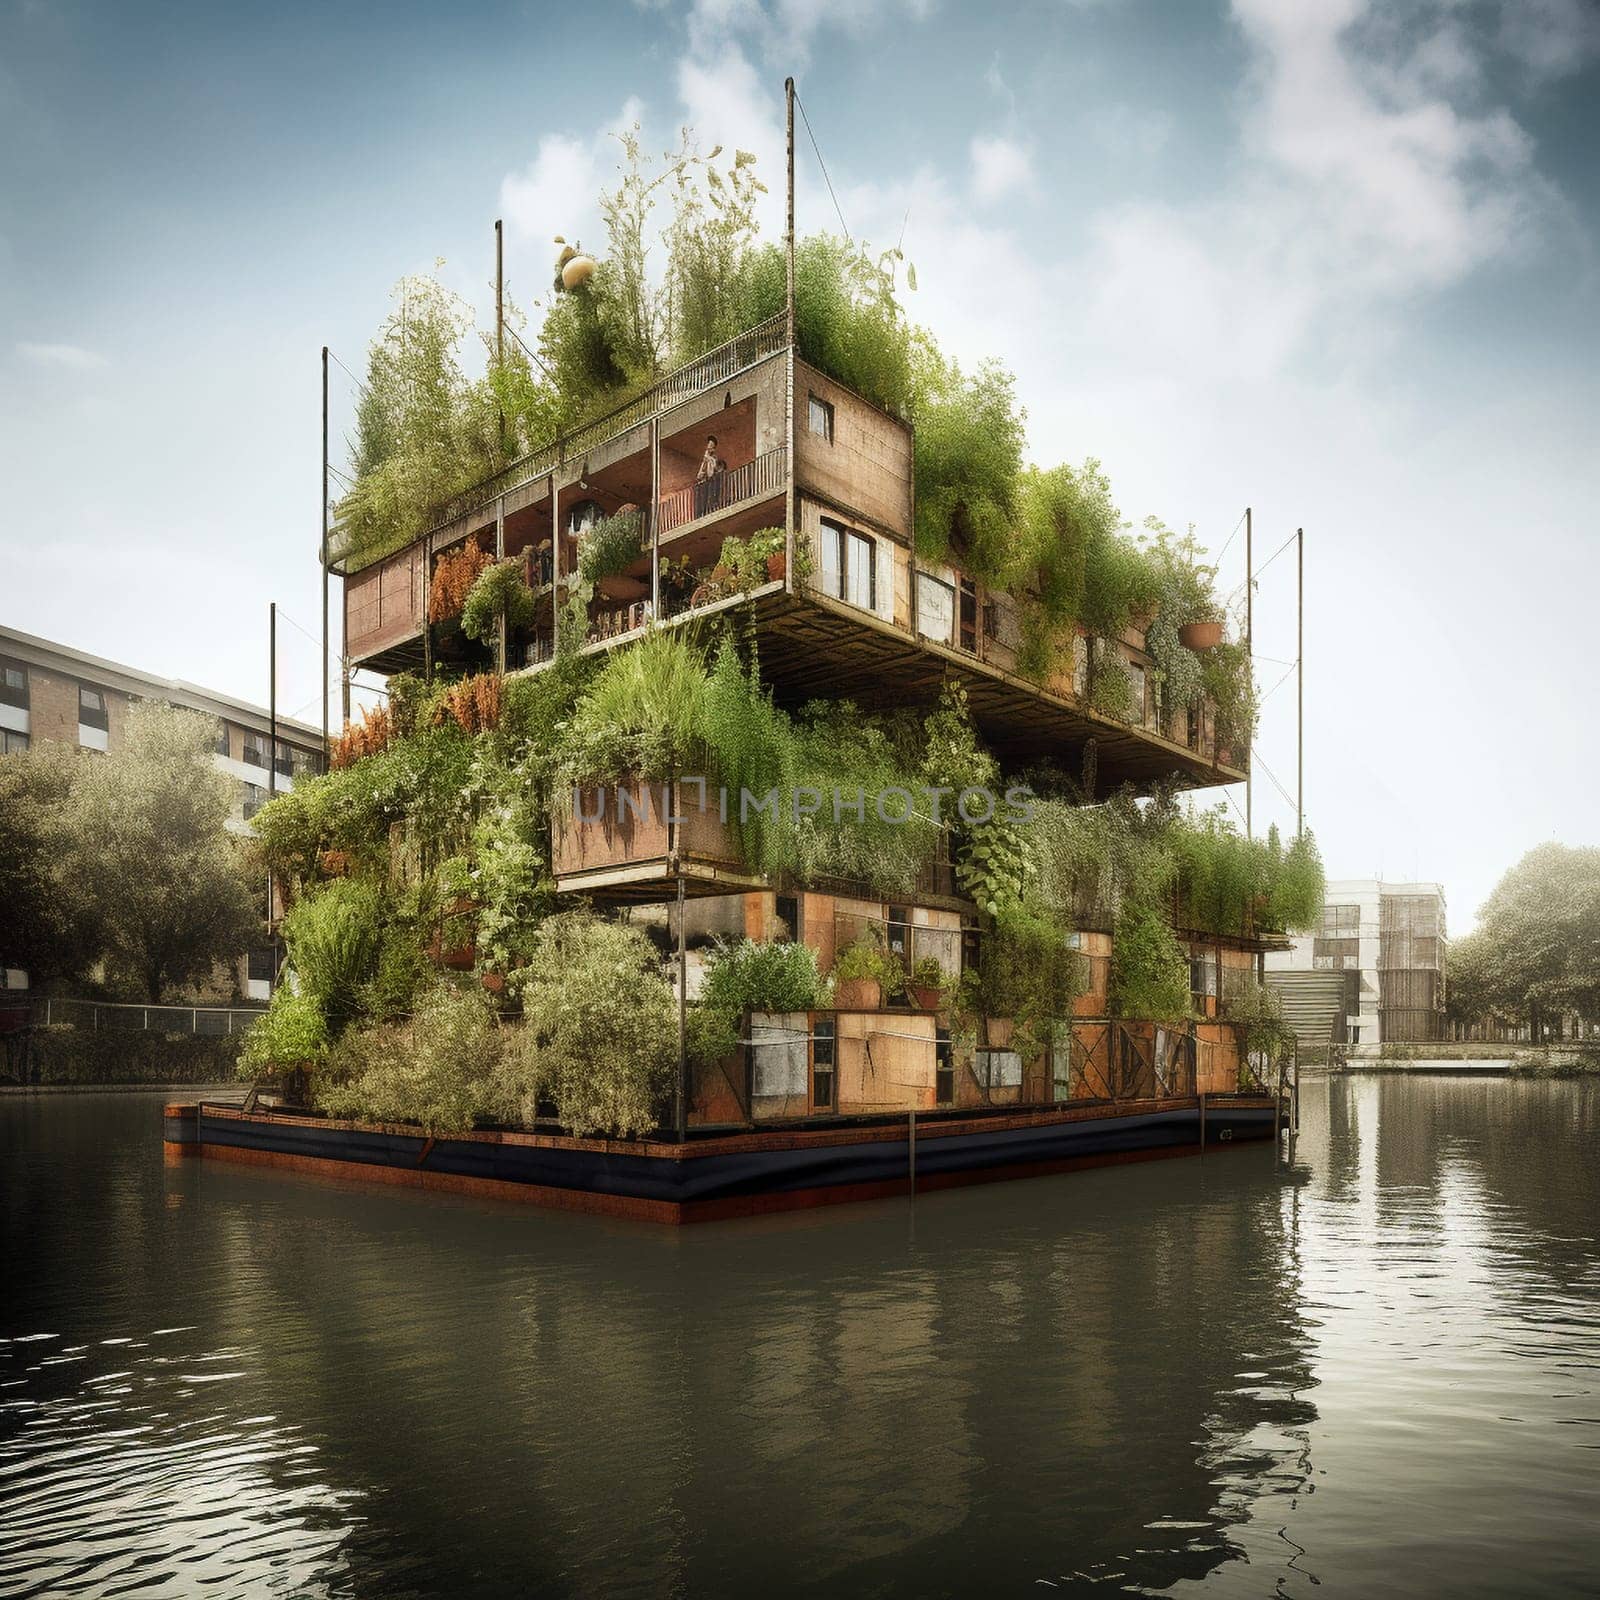 This image captures the creativity and ingenuity that can come from urban farming by showcasing a garden growing in an unusual location. The garden could be a vertical garden on the side of a building or a garden growing on a barge floating in the middle of a busy river, for example. The image conveys the sense of surprise and wonder that comes from discovering a garden in an unexpected location, as well as the satisfaction of growing your own food in a unique way.